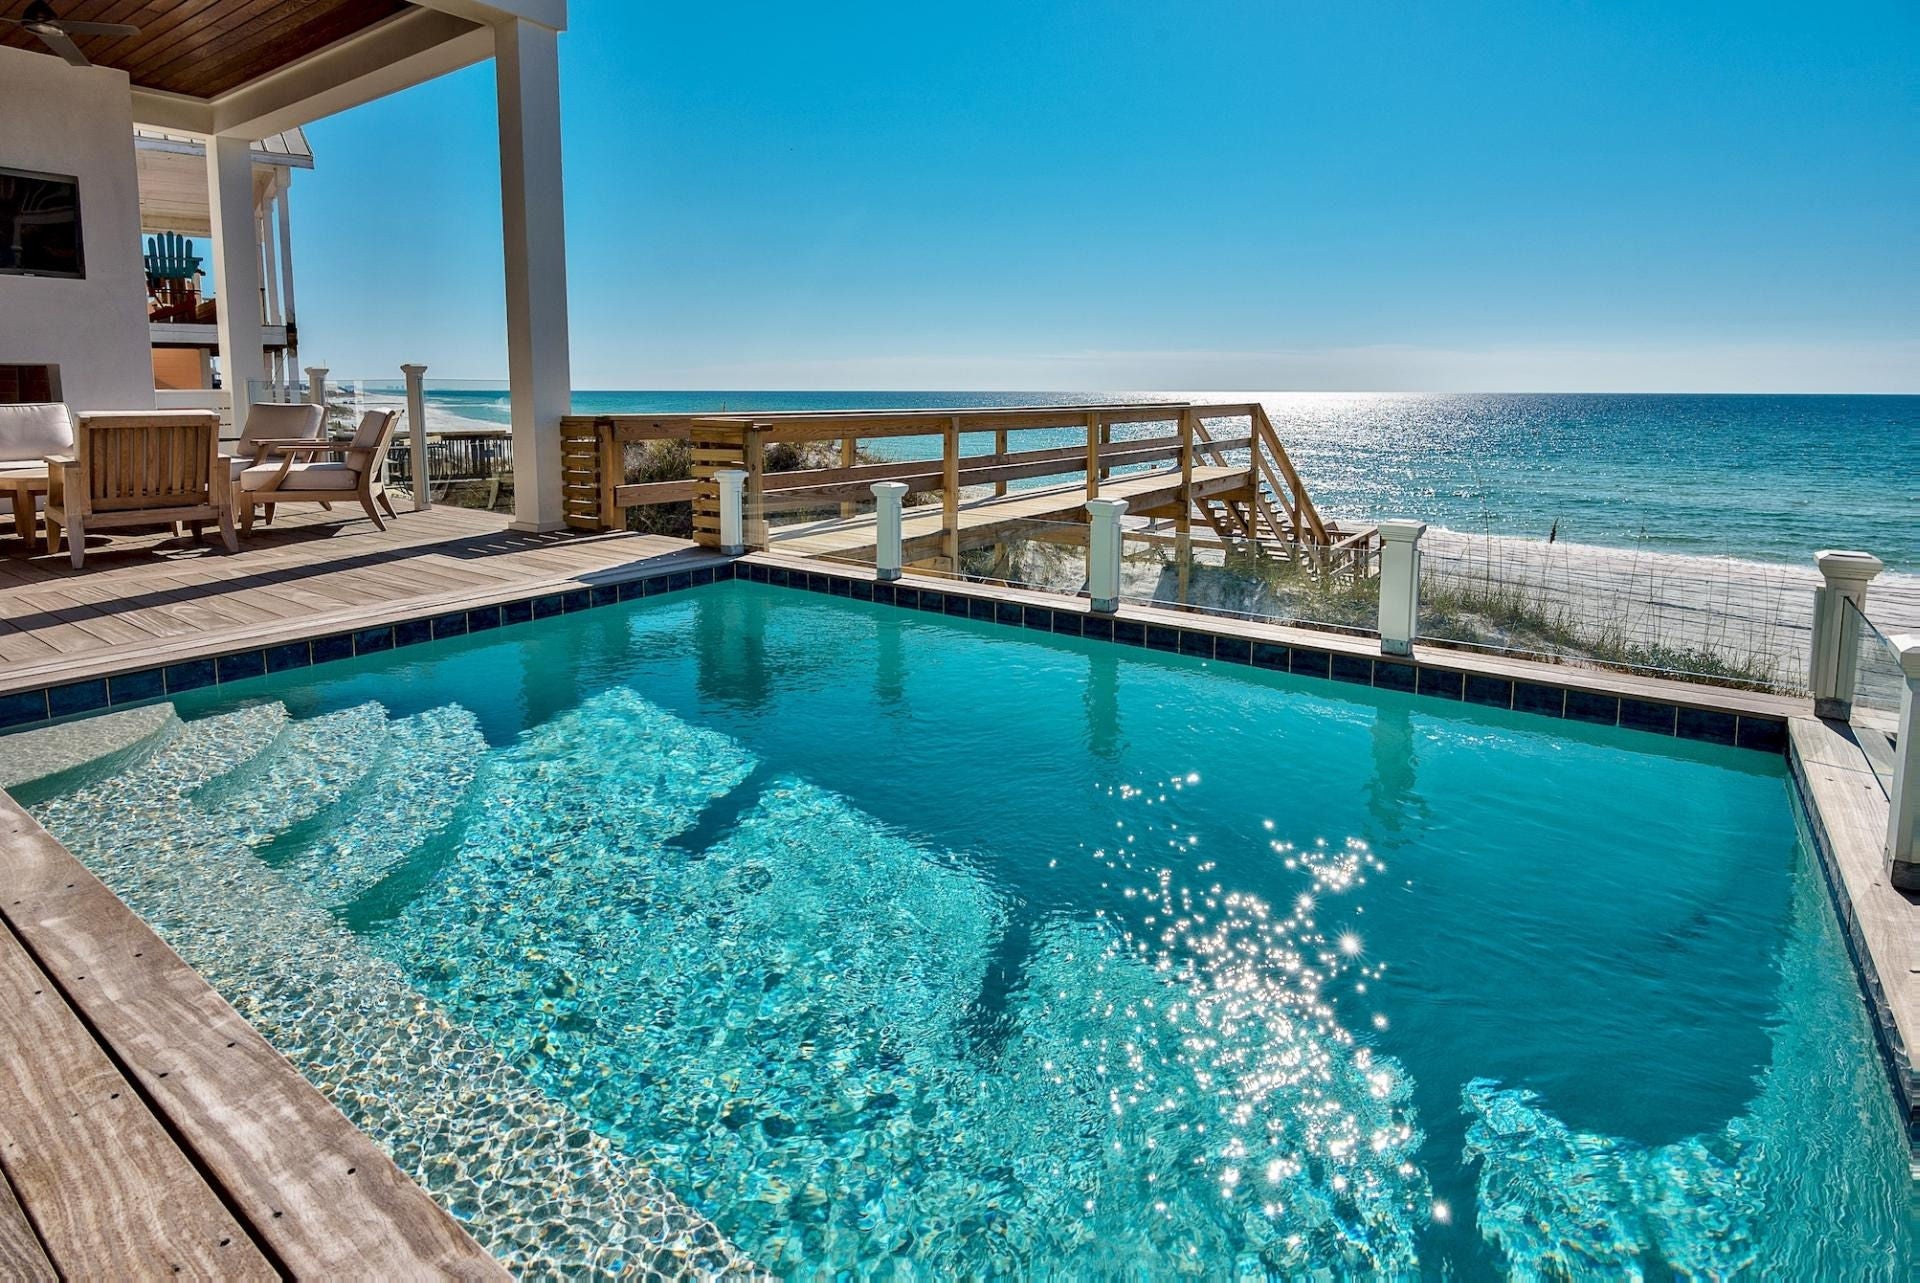 Luxurious views of the Gulf from Kicking Back's pool!